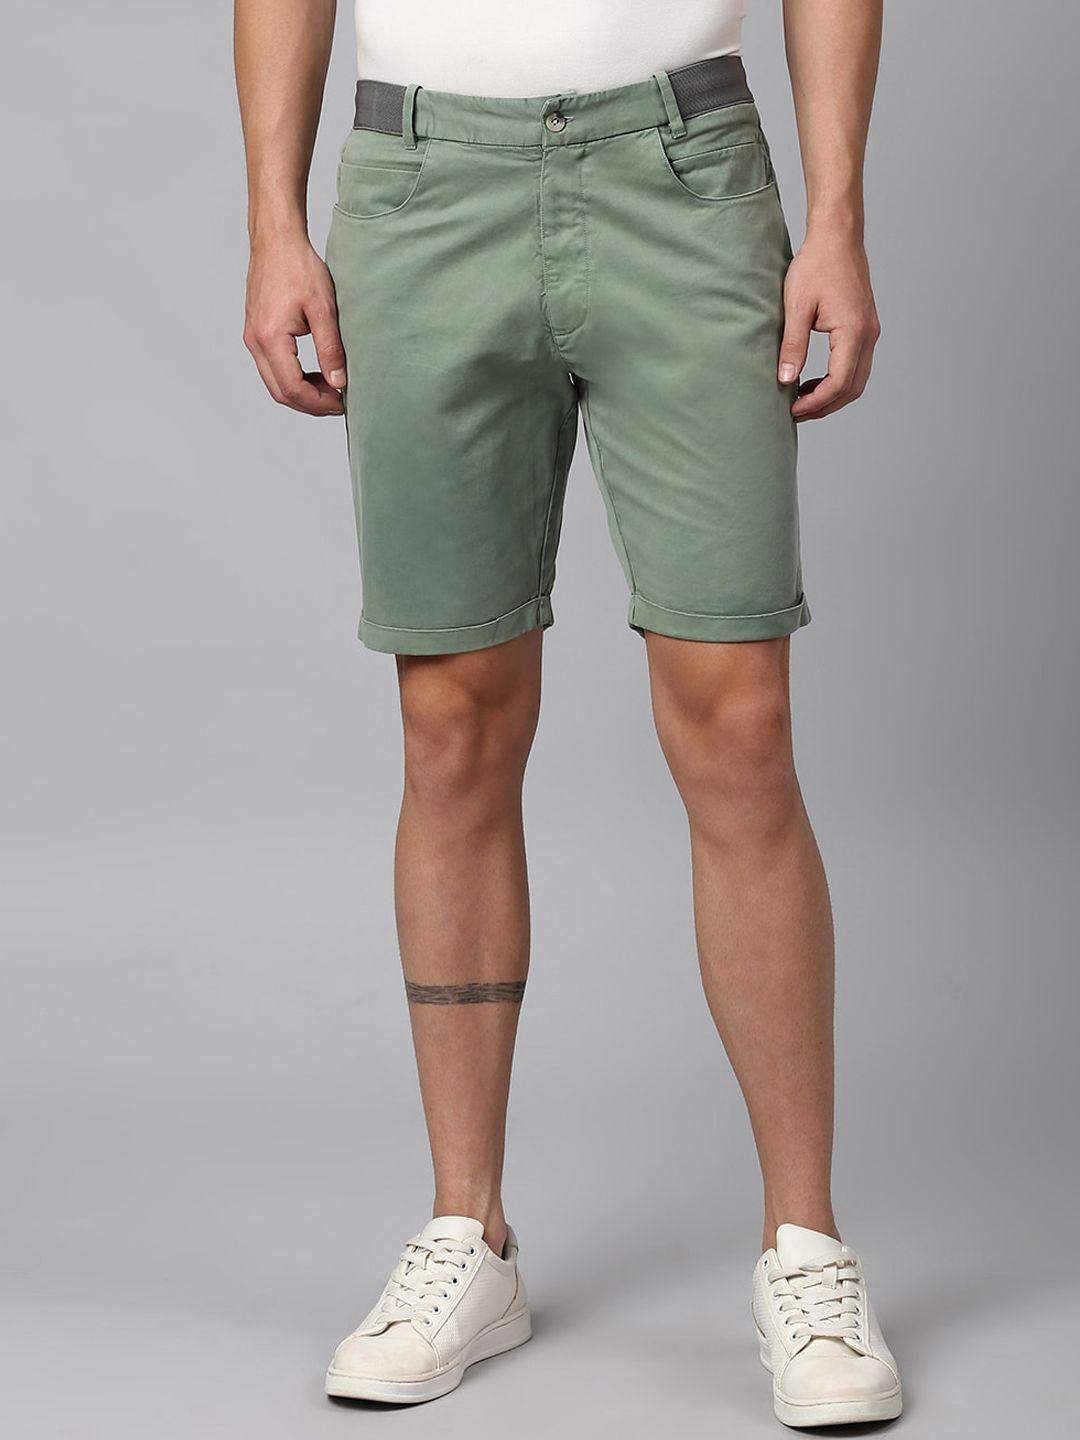 slowave men mid-rise above knee chino shorts